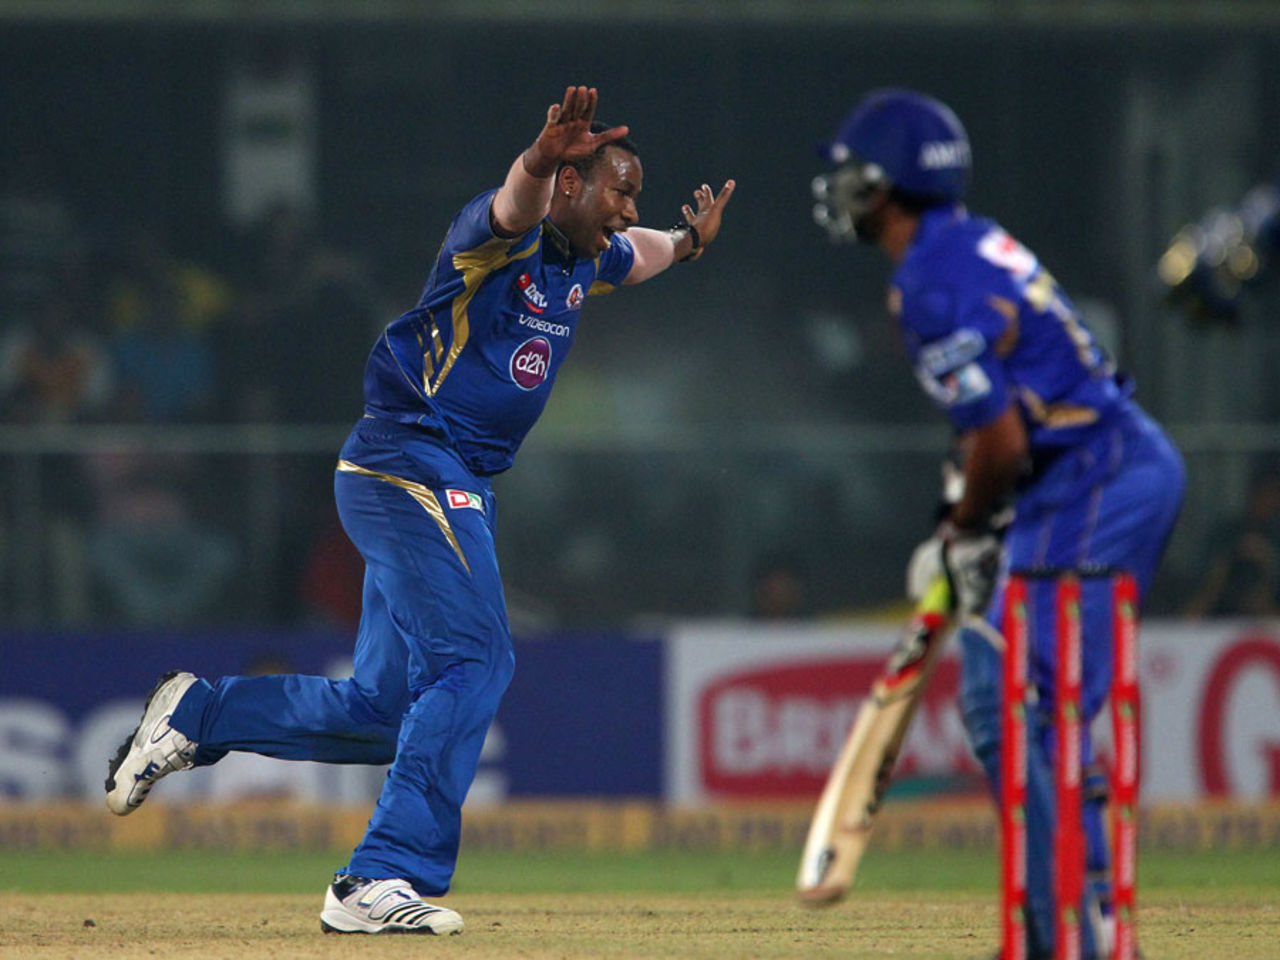 Kieron Pollard picked up the wicket that secured victory, Mumbai Indians v Rajasthan Royals, Final, Champions League 2013, Delhi, October 6, 2013